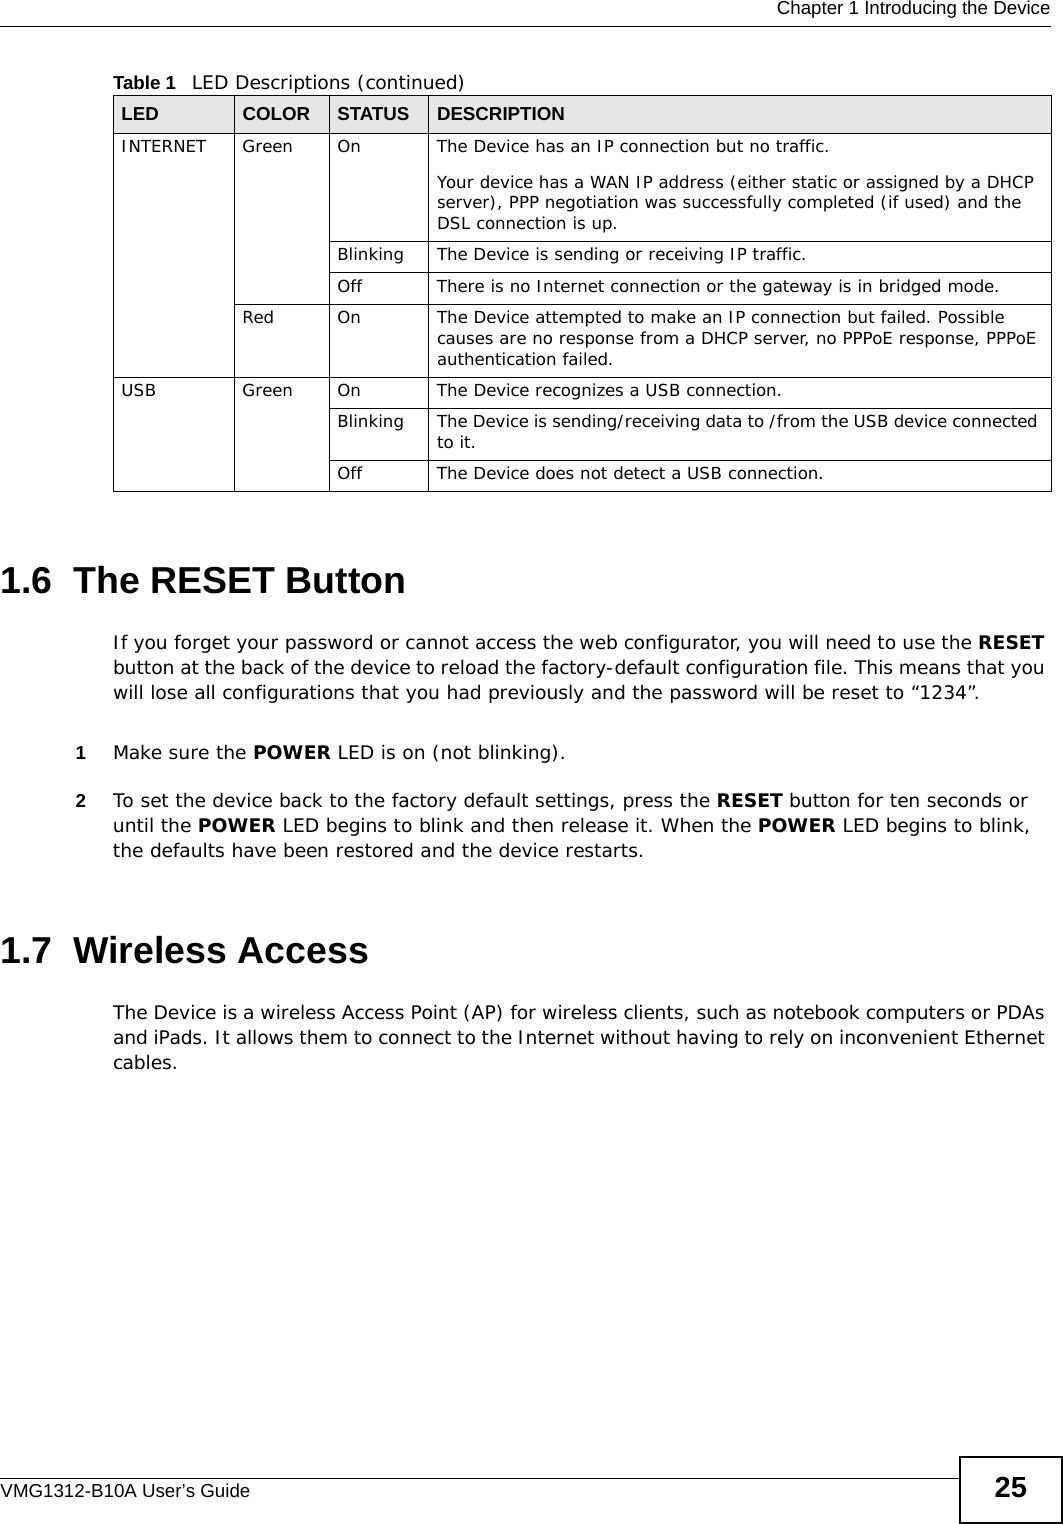  Chapter 1 Introducing the DeviceVMG1312-B10A User’s Guide 251.6  The RESET ButtonIf you forget your password or cannot access the web configurator, you will need to use the RESET button at the back of the device to reload the factory-default configuration file. This means that you will lose all configurations that you had previously and the password will be reset to “1234”. 1Make sure the POWER LED is on (not blinking).2To set the device back to the factory default settings, press the RESET button for ten seconds or until the POWER LED begins to blink and then release it. When the POWER LED begins to blink, the defaults have been restored and the device restarts.1.7  Wireless AccessThe Device is a wireless Access Point (AP) for wireless clients, such as notebook computers or PDAs and iPads. It allows them to connect to the Internet without having to rely on inconvenient Ethernet cables.INTERNET Green On The Device has an IP connection but no traffic.Your device has a WAN IP address (either static or assigned by a DHCP server), PPP negotiation was successfully completed (if used) and the DSL connection is up.Blinking The Device is sending or receiving IP traffic.Off There is no Internet connection or the gateway is in bridged mode.Red On The Device attempted to make an IP connection but failed. Possible causes are no response from a DHCP server, no PPPoE response, PPPoE authentication failed.USB Green On The Device recognizes a USB connection.Blinking The Device is sending/receiving data to /from the USB device connected to it.Off The Device does not detect a USB connection.Table 1   LED Descriptions (continued)LED COLOR STATUS DESCRIPTION